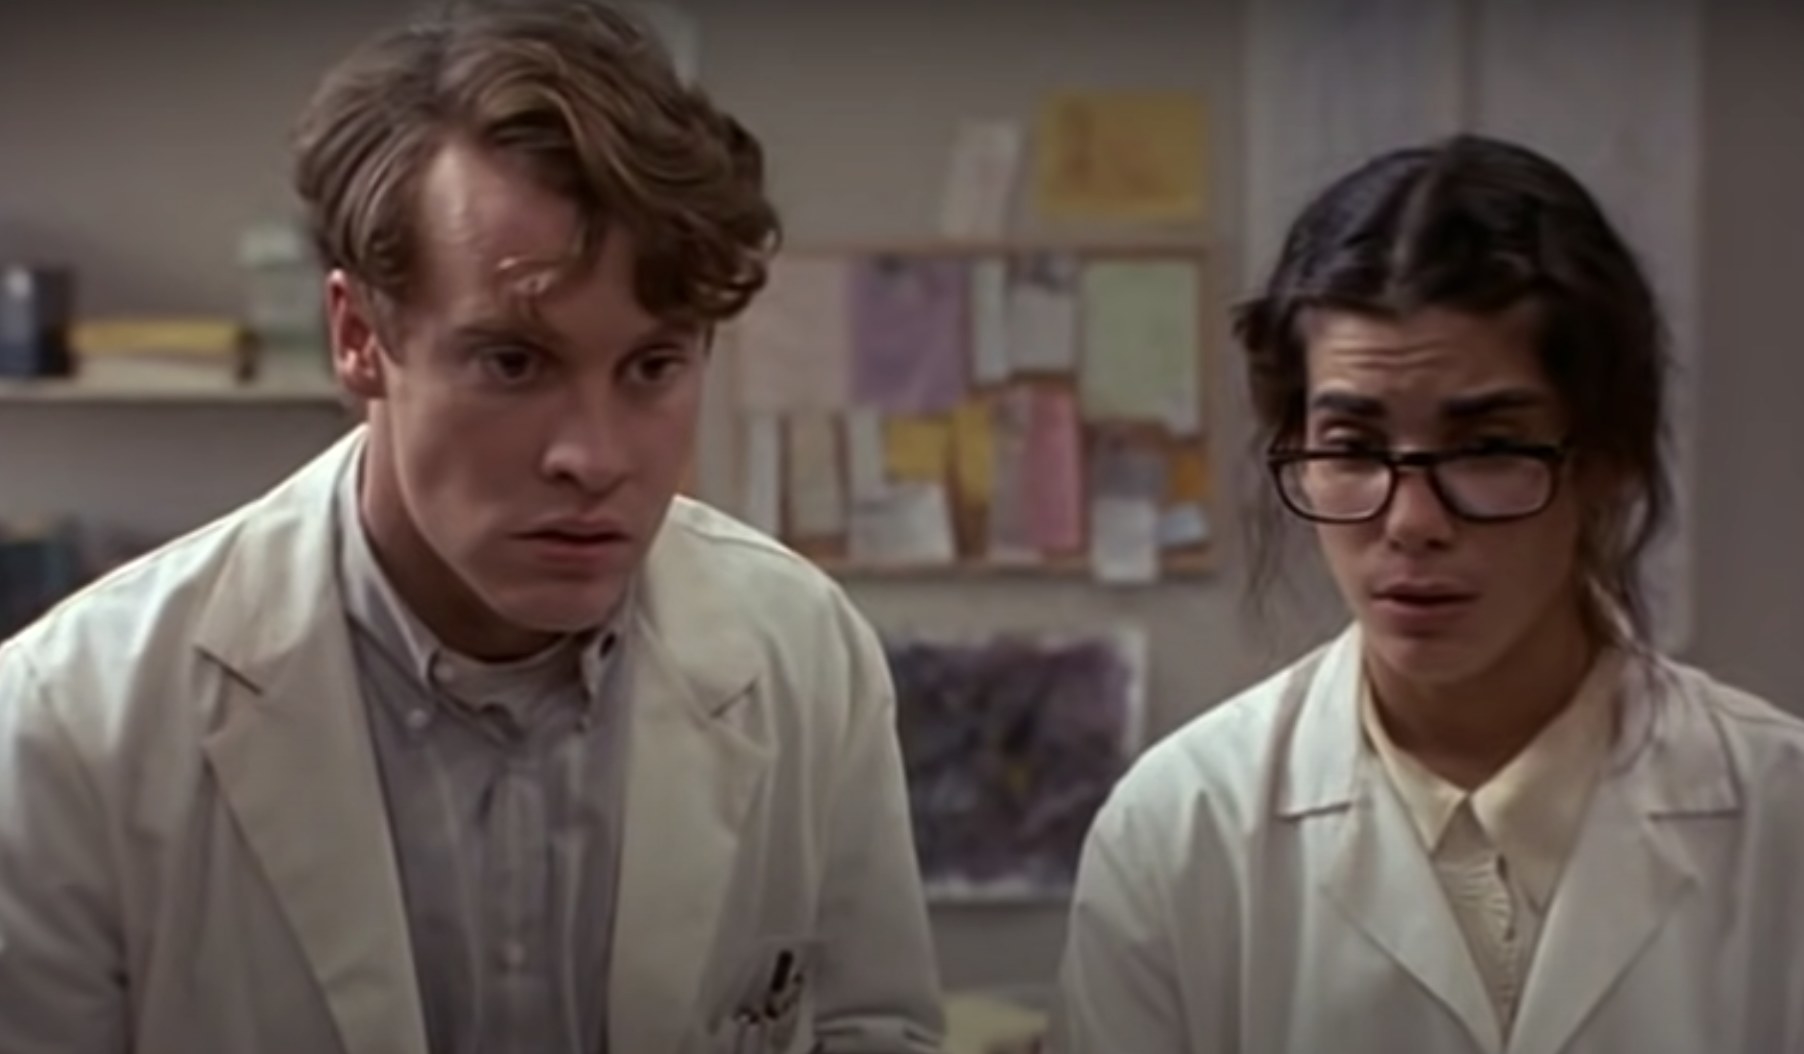 Actors  Tate Donovan and Sandra Bullock wear labcoats while looking distraught.